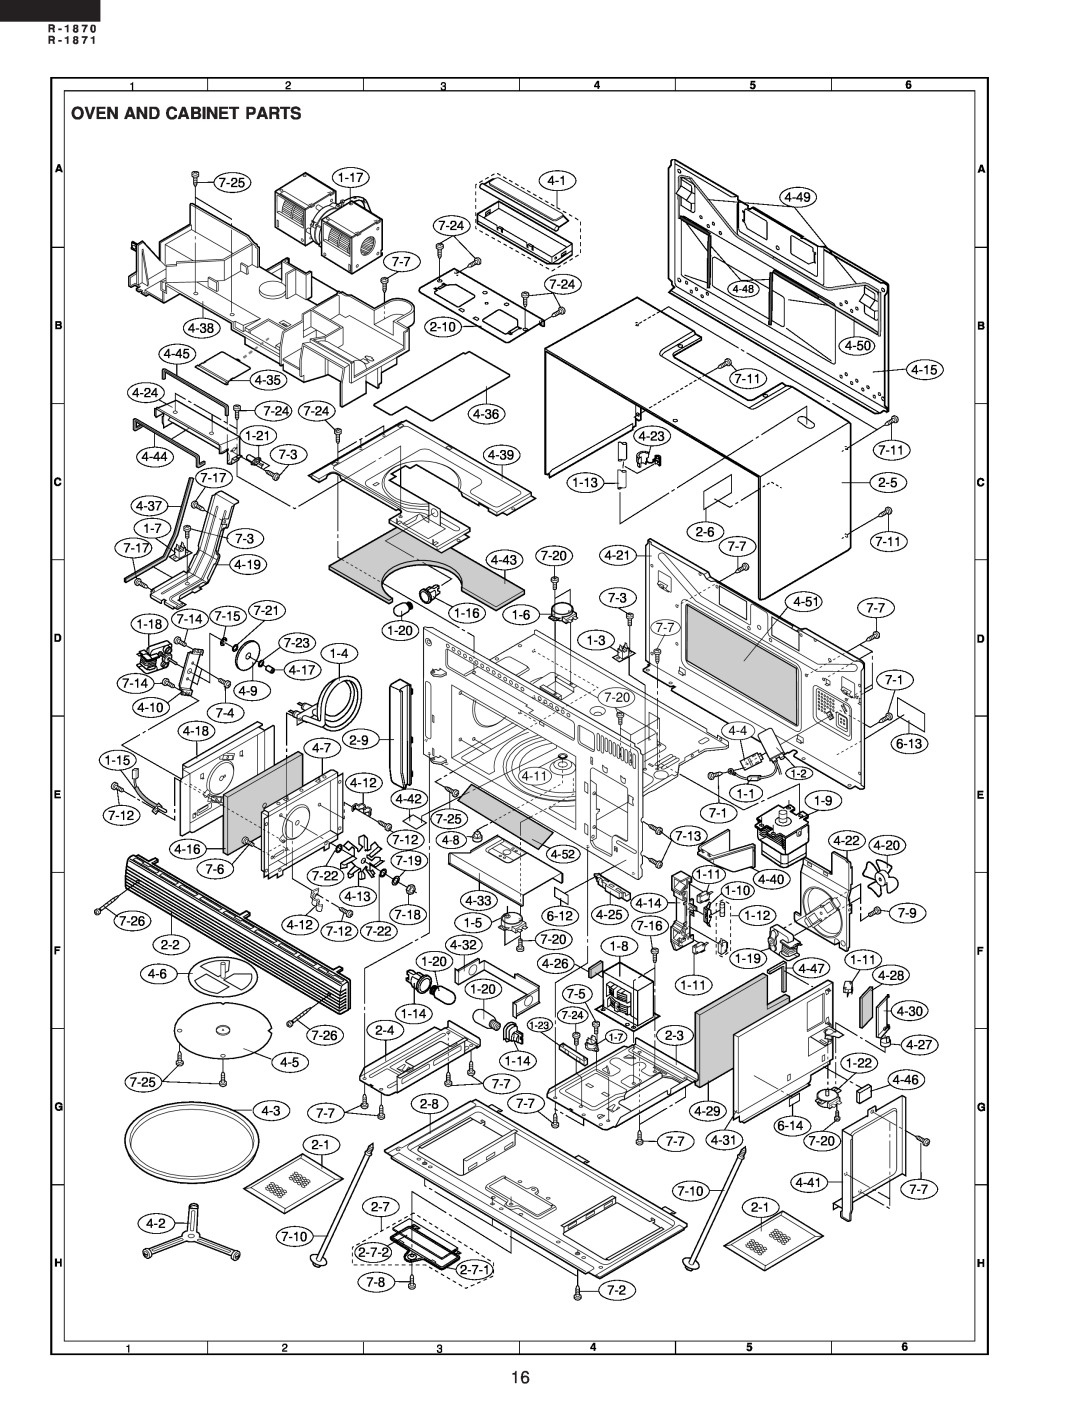 Sharp R-1870 service manual Oven And Cabinet Parts, R - 1 8 7 